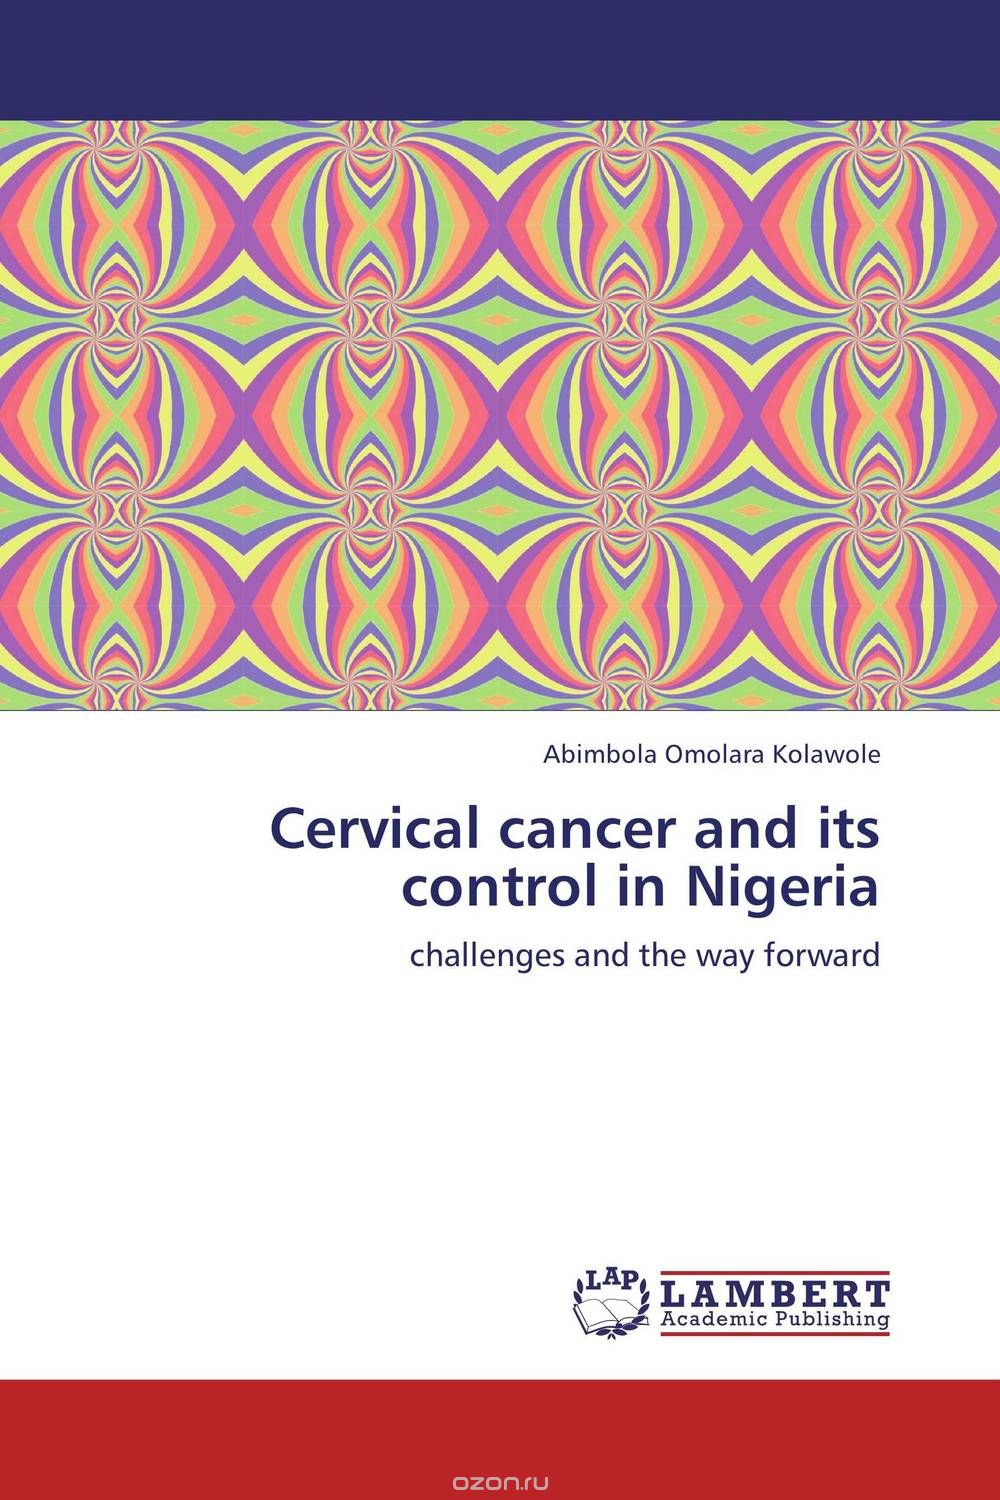 Cervical cancer and its control in Nigeria